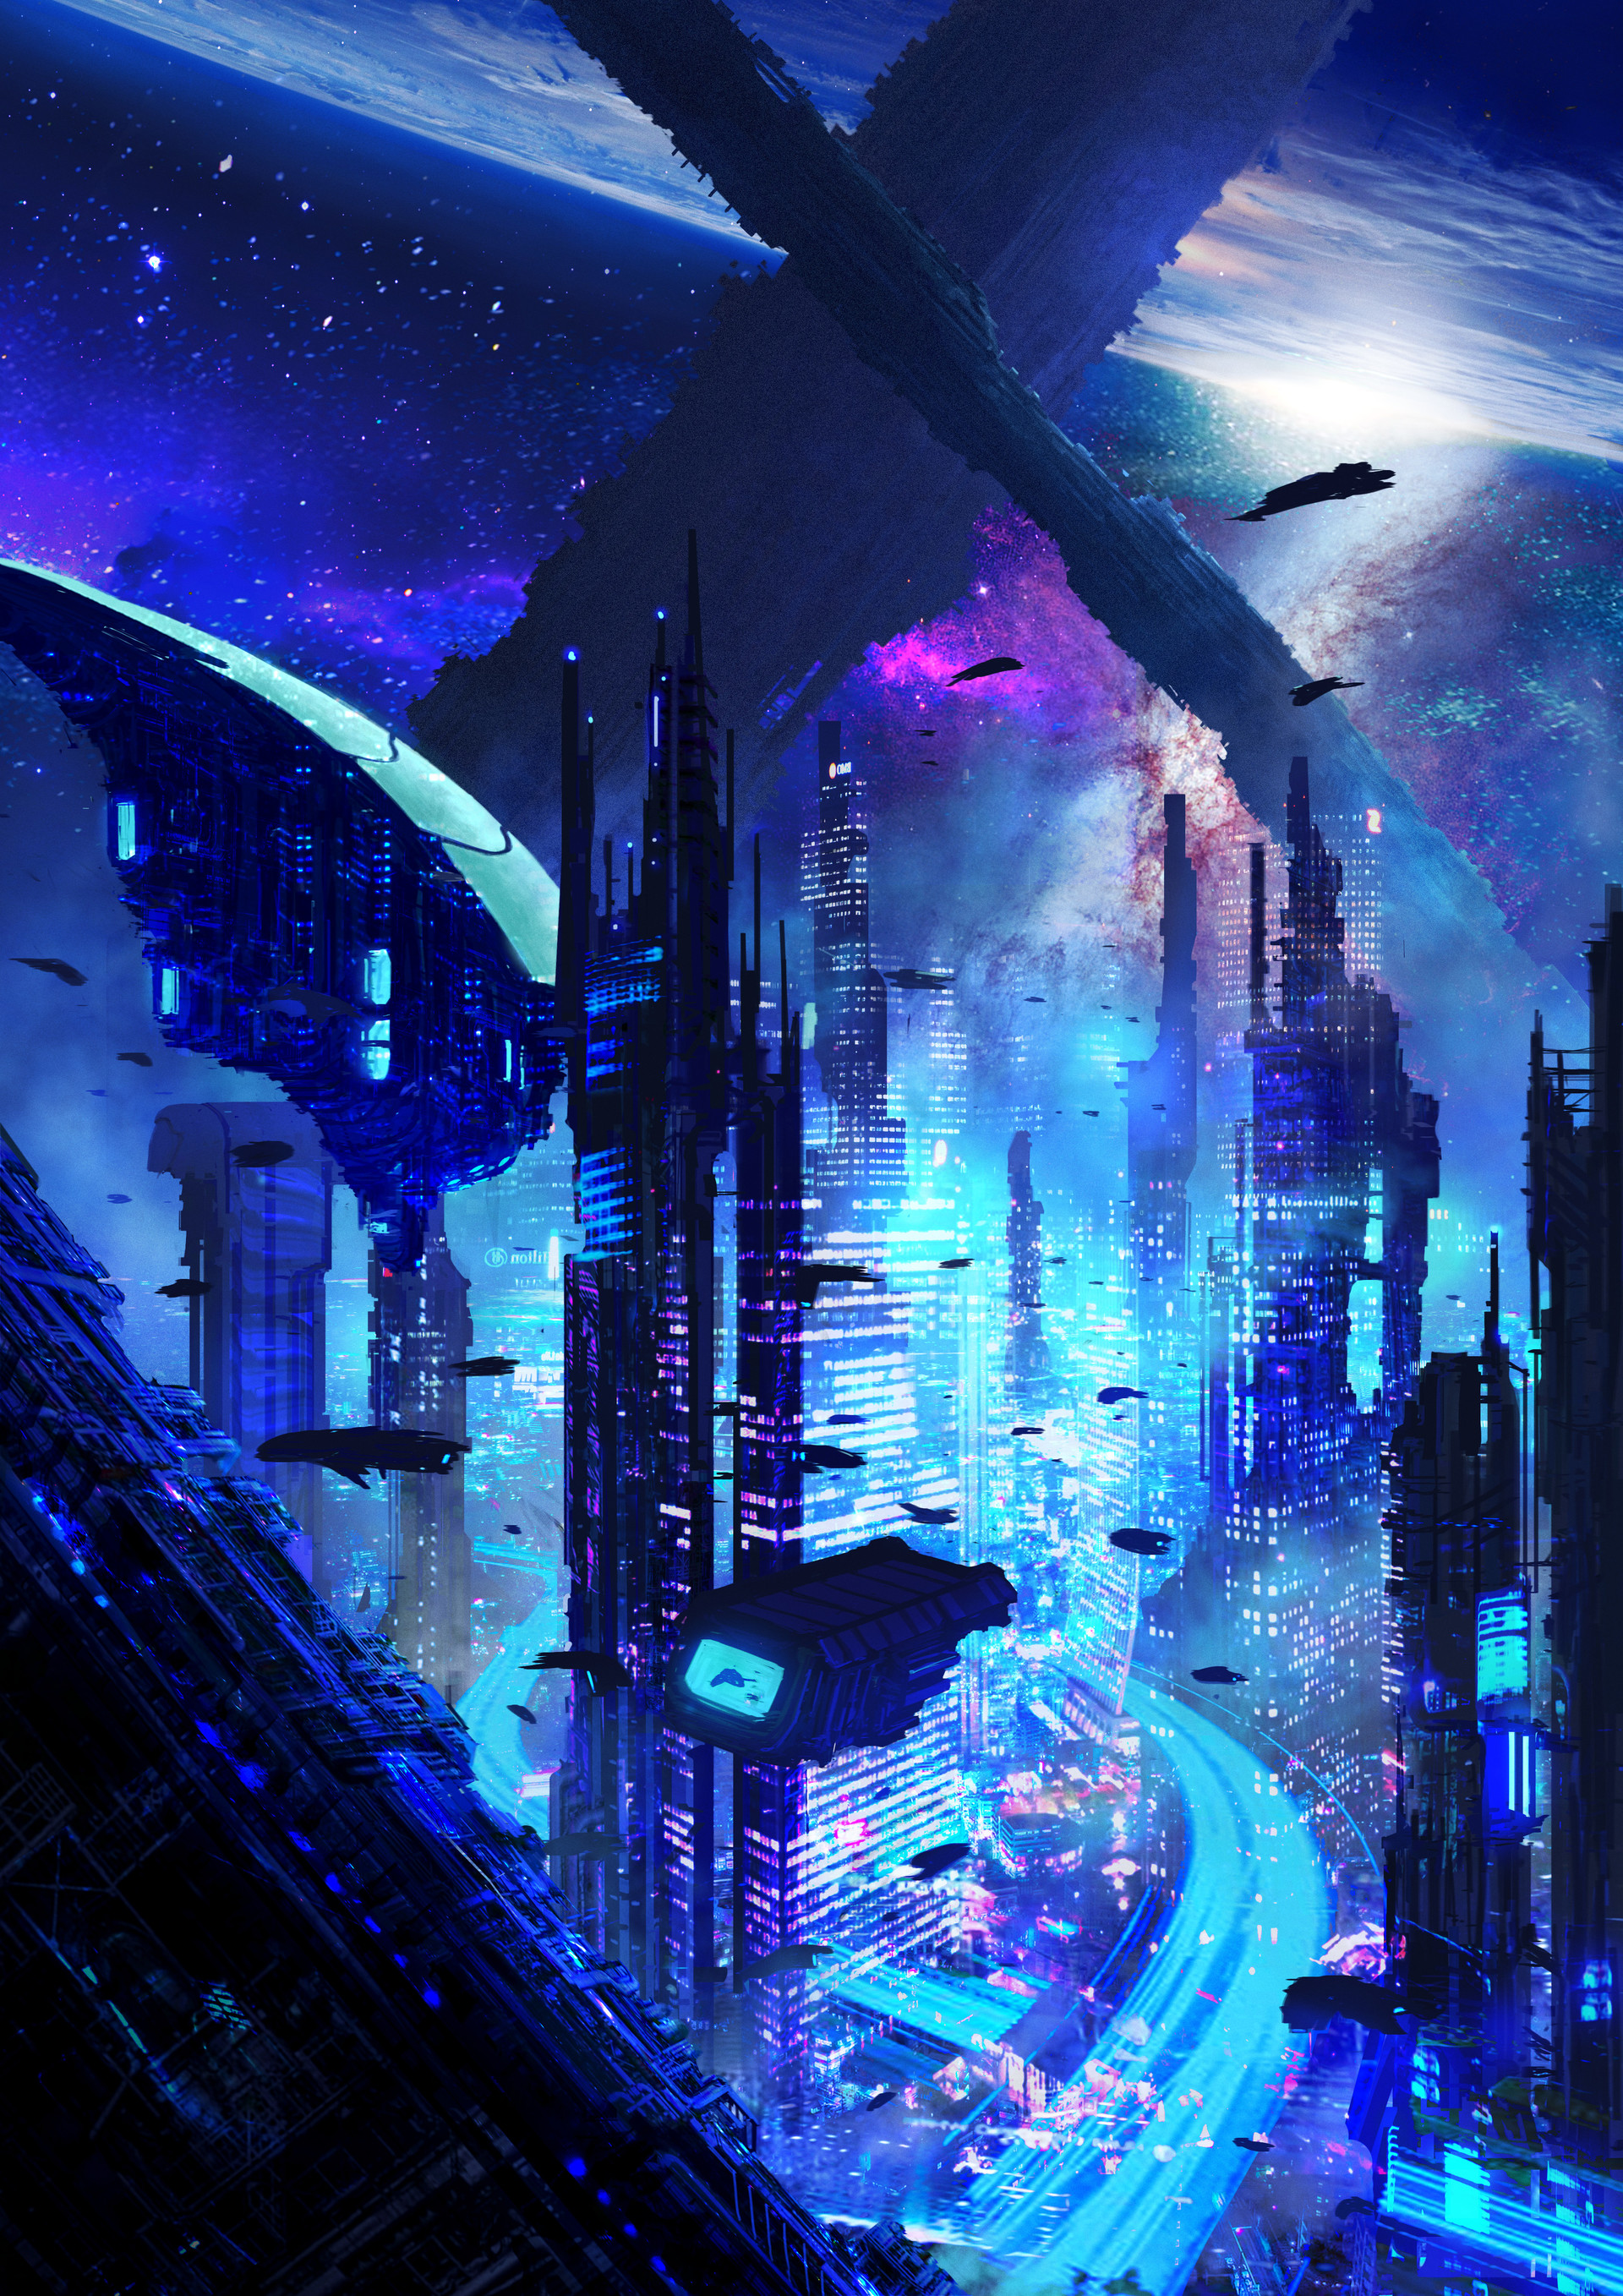 Popular Sci-Fi Image for Phone